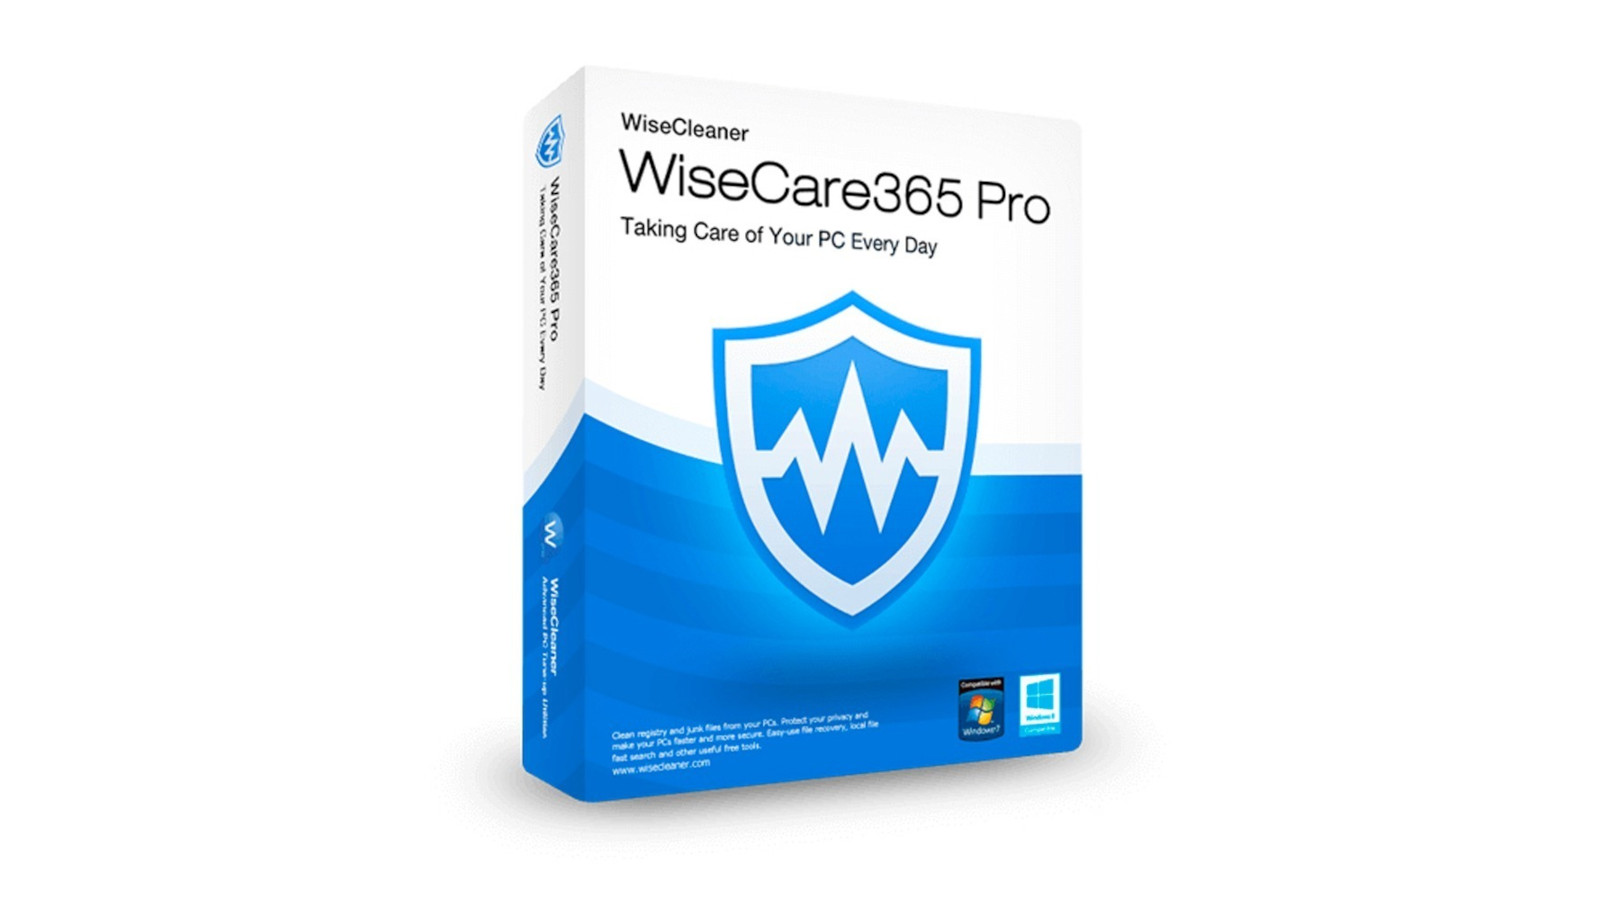 Wise Care 365 PRO CD Key (1 Year / 1 PC) (18.05$)